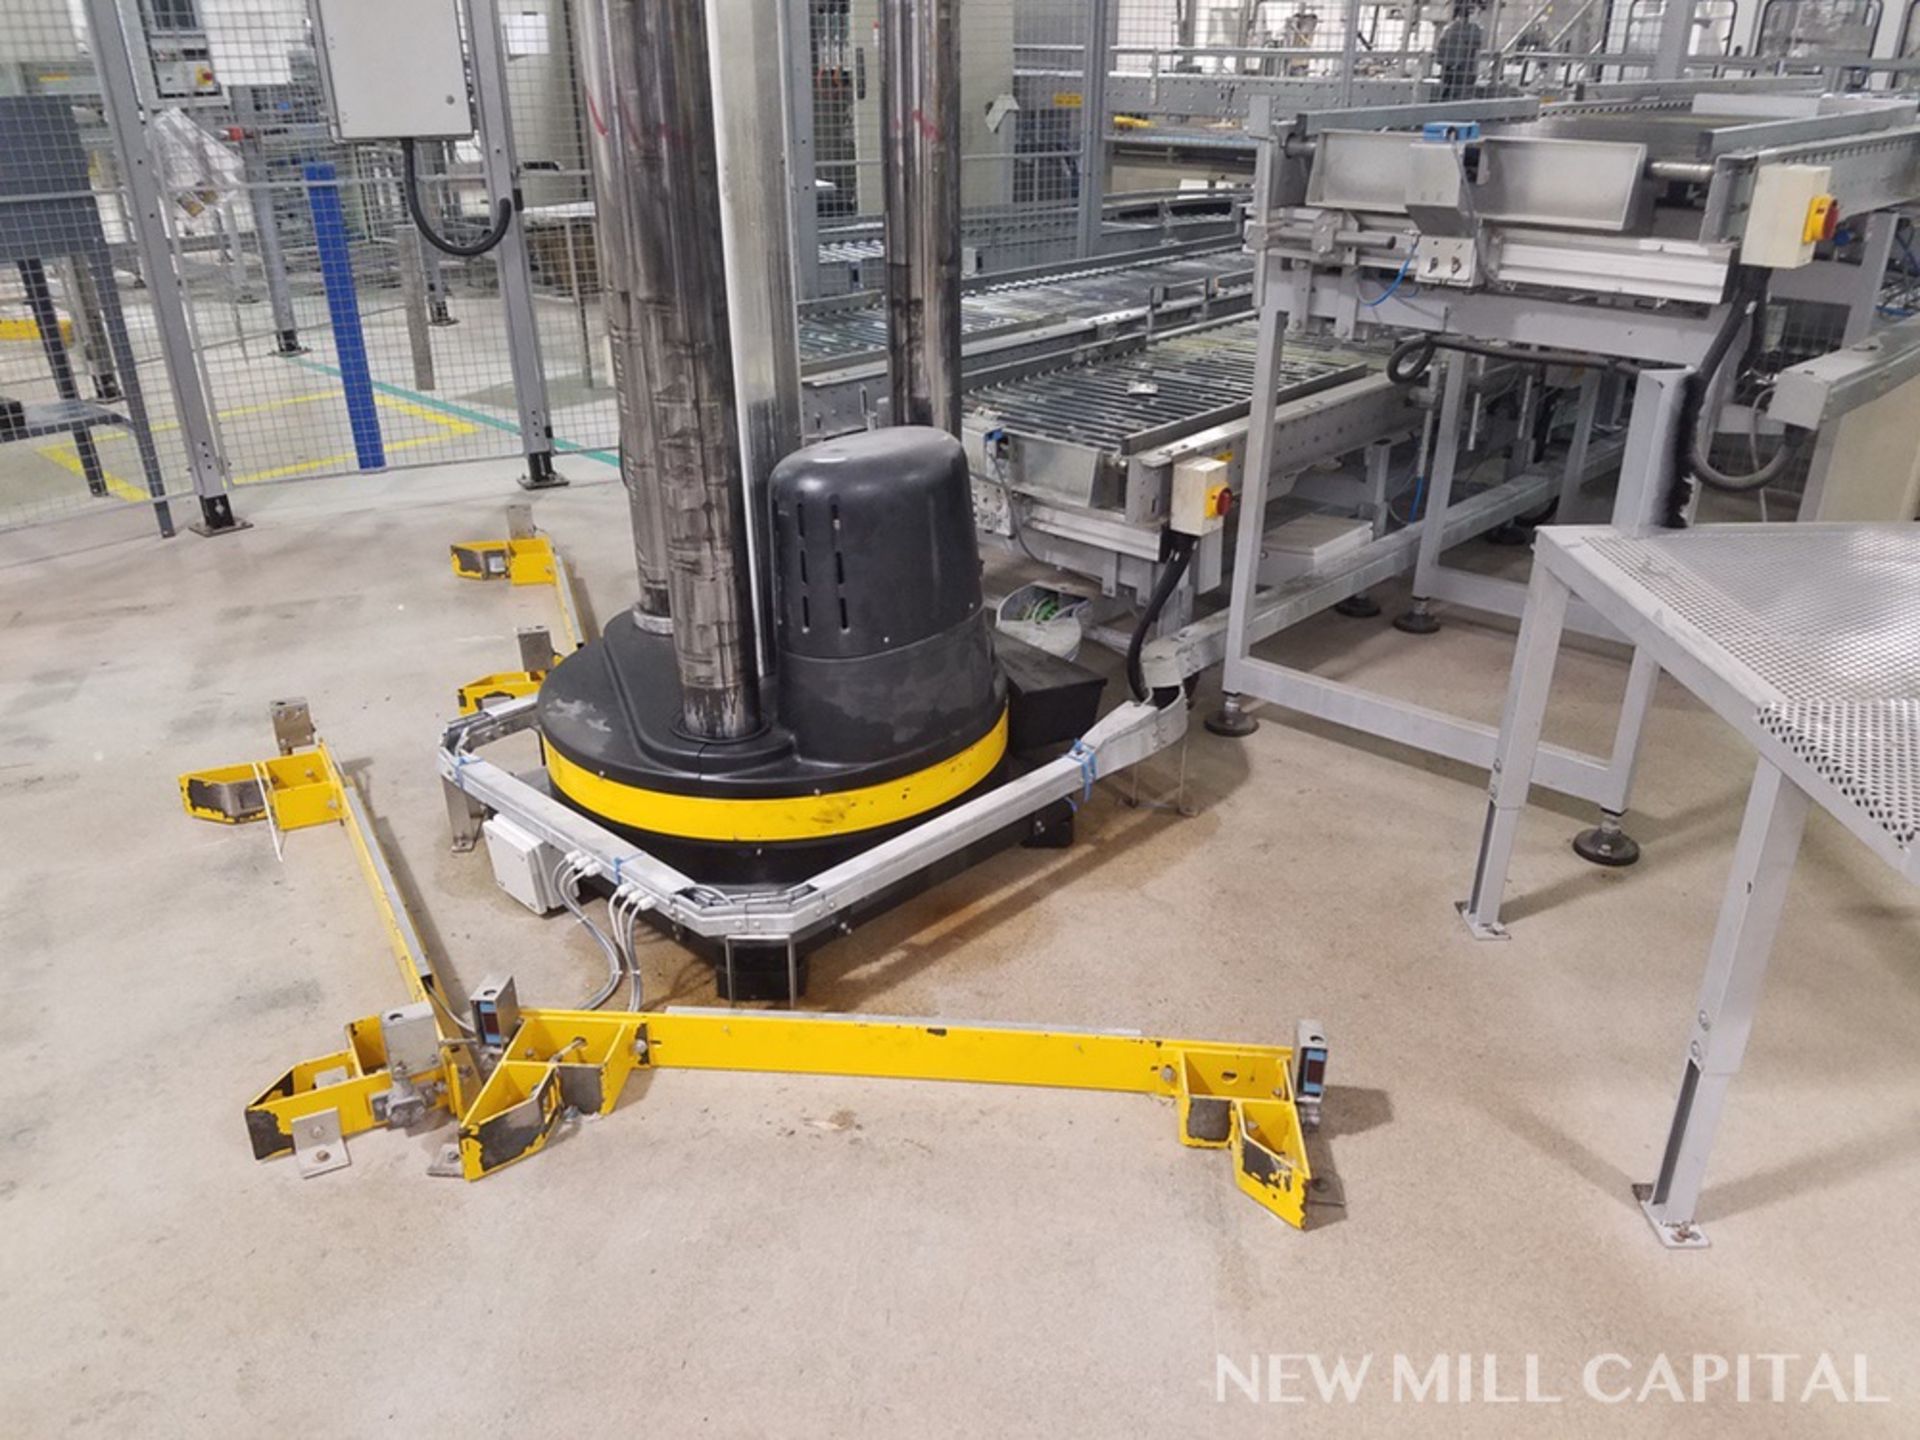 Skilled 504 Palletizing Robot | Contact Rigger for Pricing - Image 9 of 13